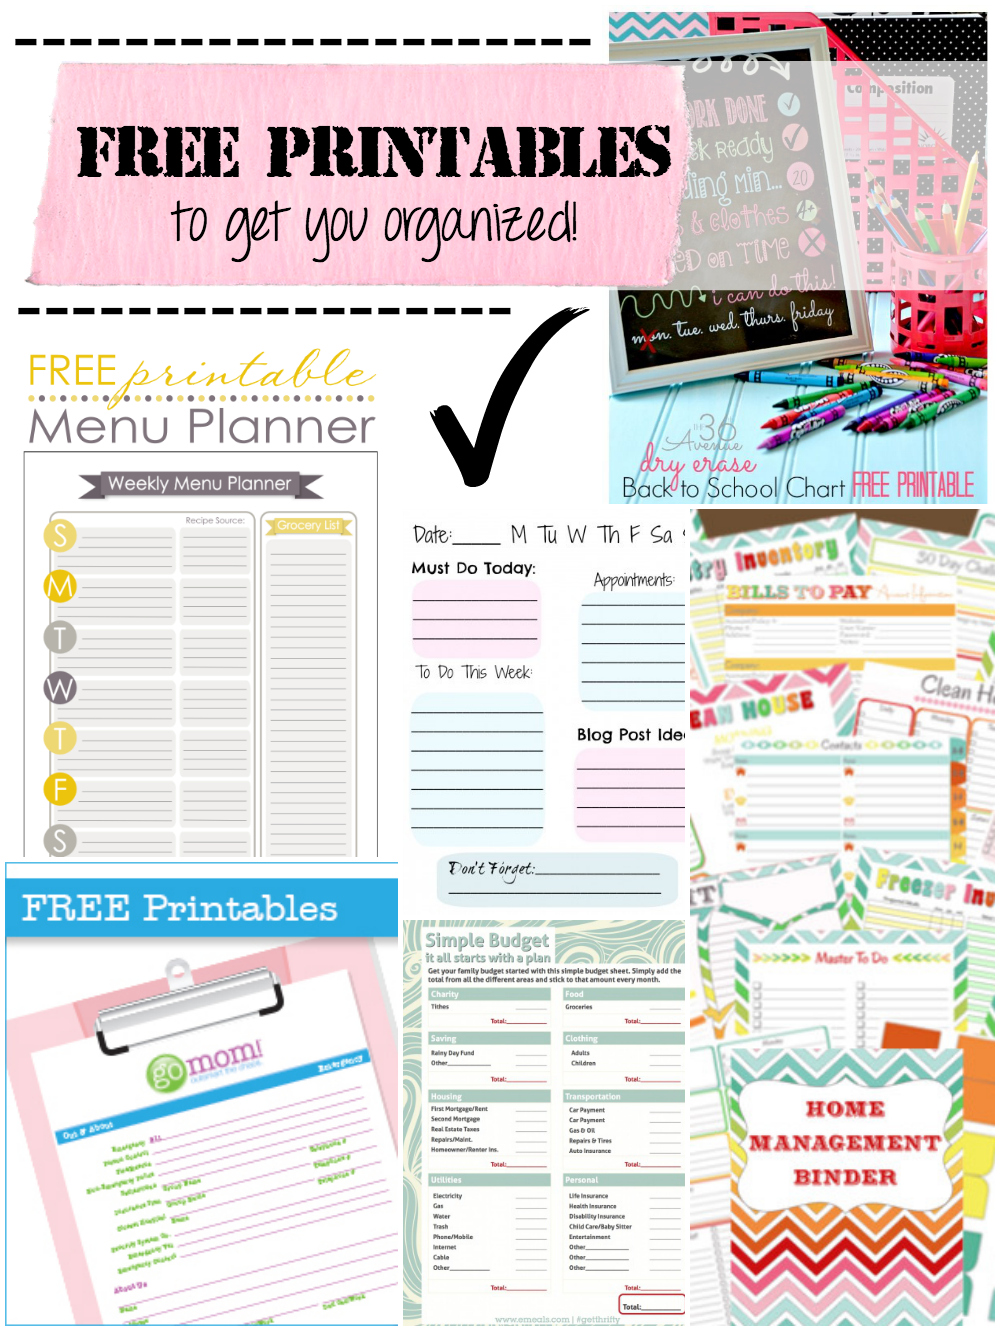 7-best-images-of-travel-life-home-organizing-printables-free